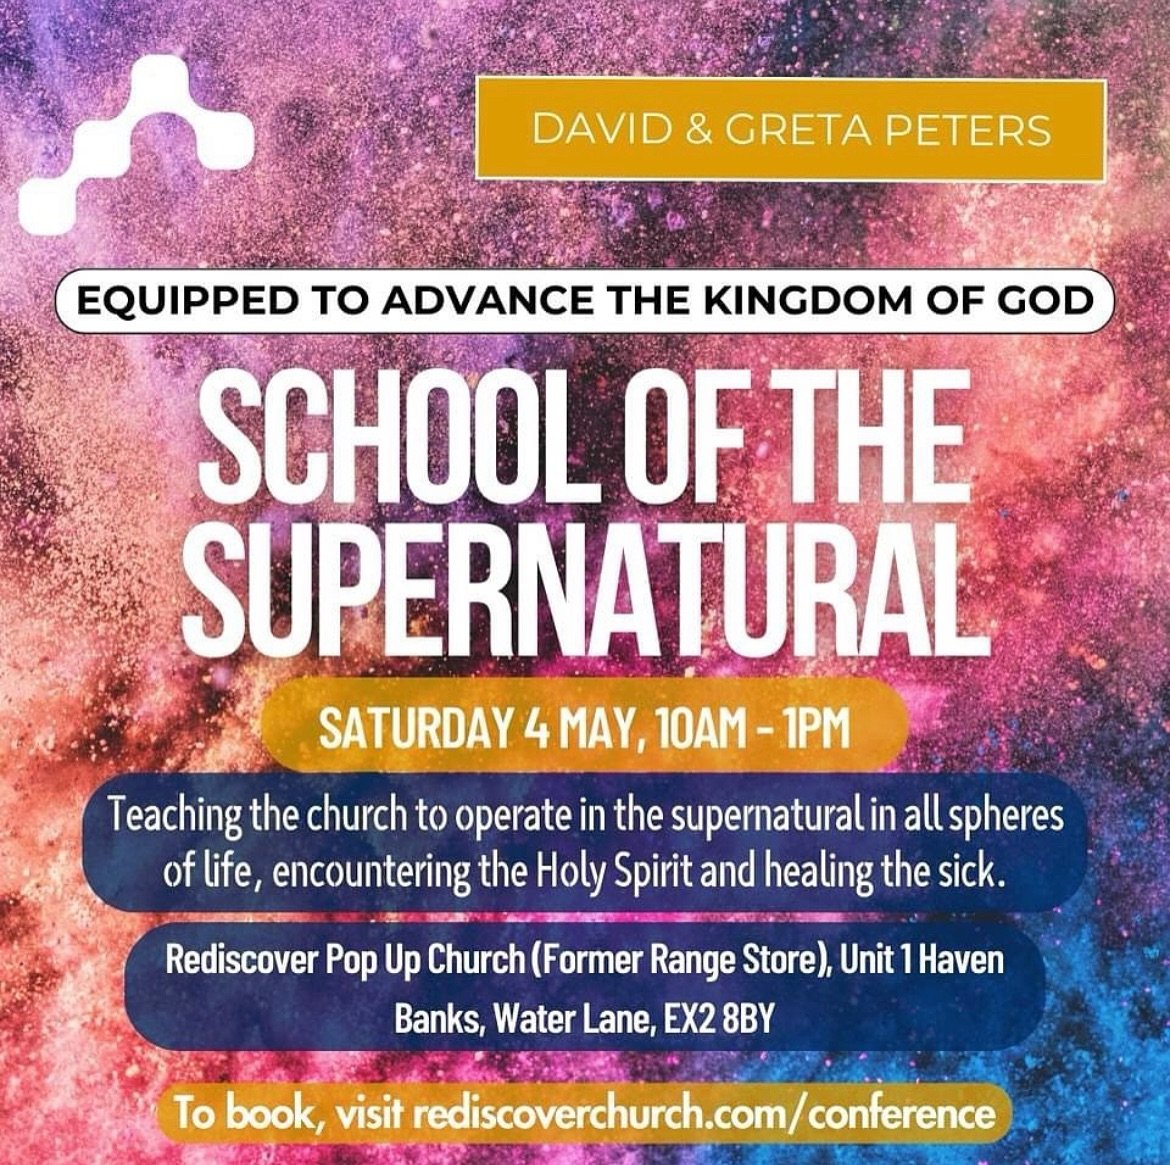 The Kingdom of God is power! 
We&rsquo;re so excited to welcome David and Greta Peters from New Zealand back with us for this day conference which will equip, inspire and set you up with the tools to make a Godly impact in your every day life! 

Book